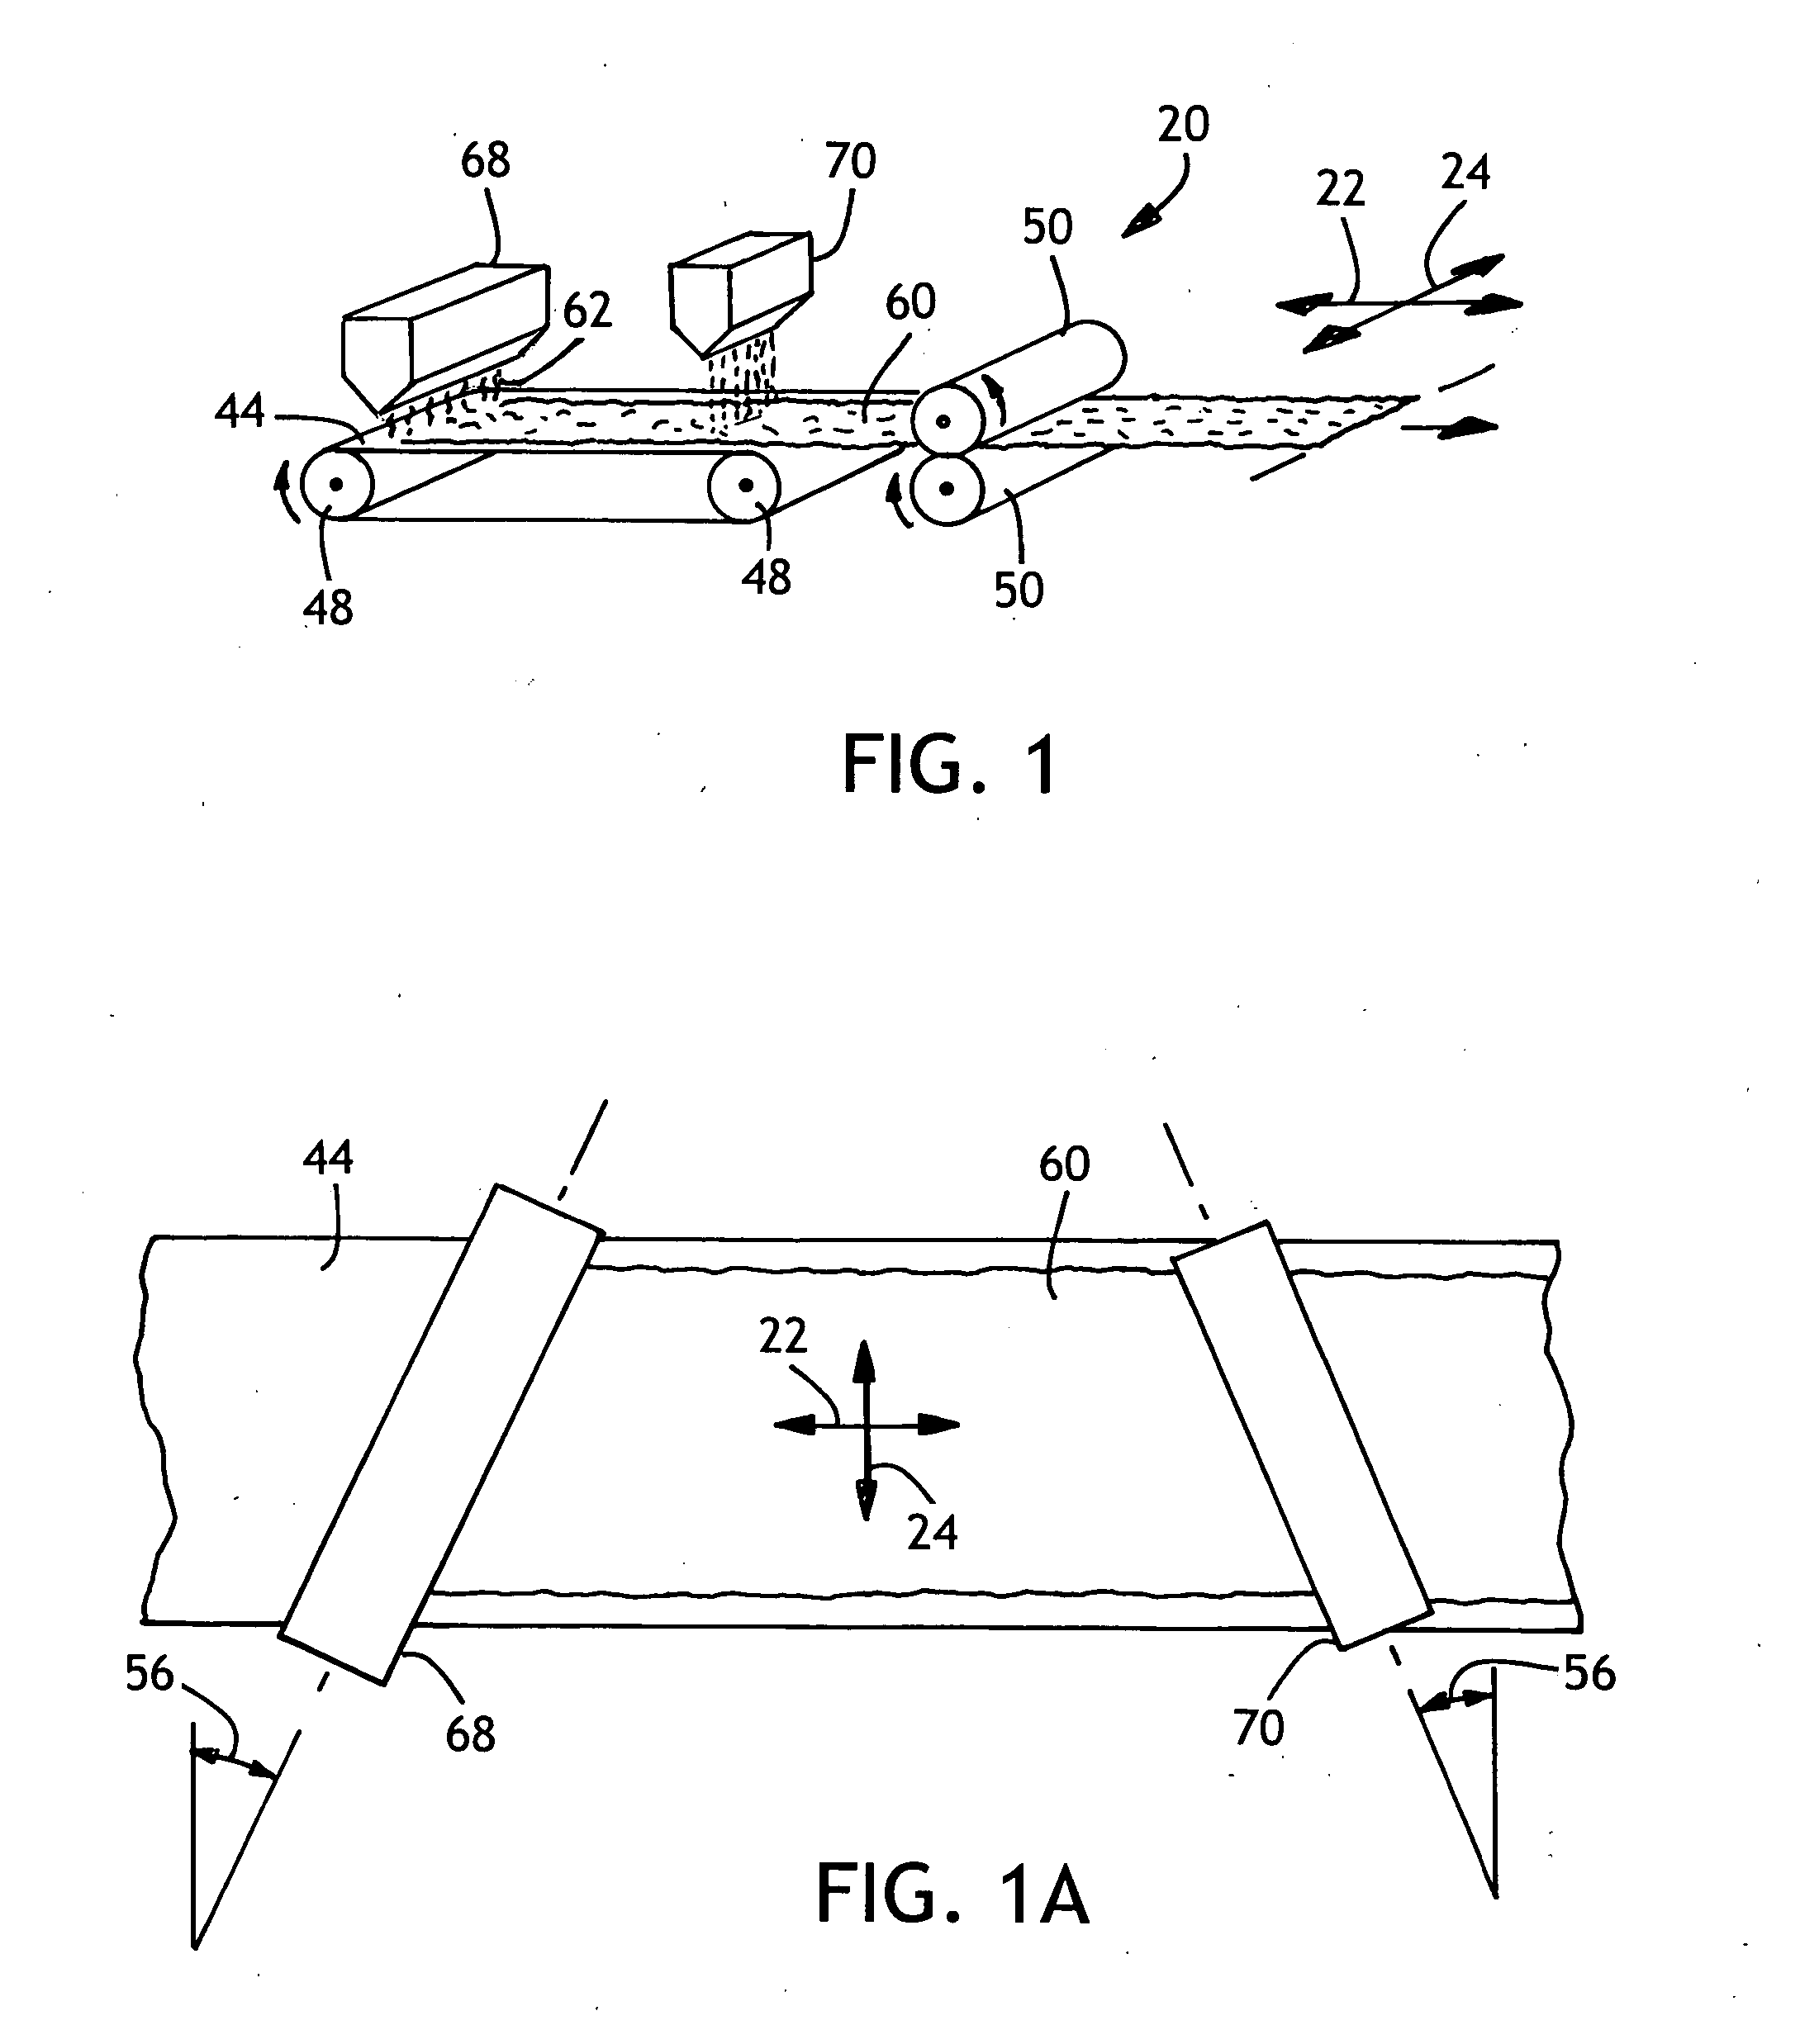 Fibers and nonwovens with improved properties